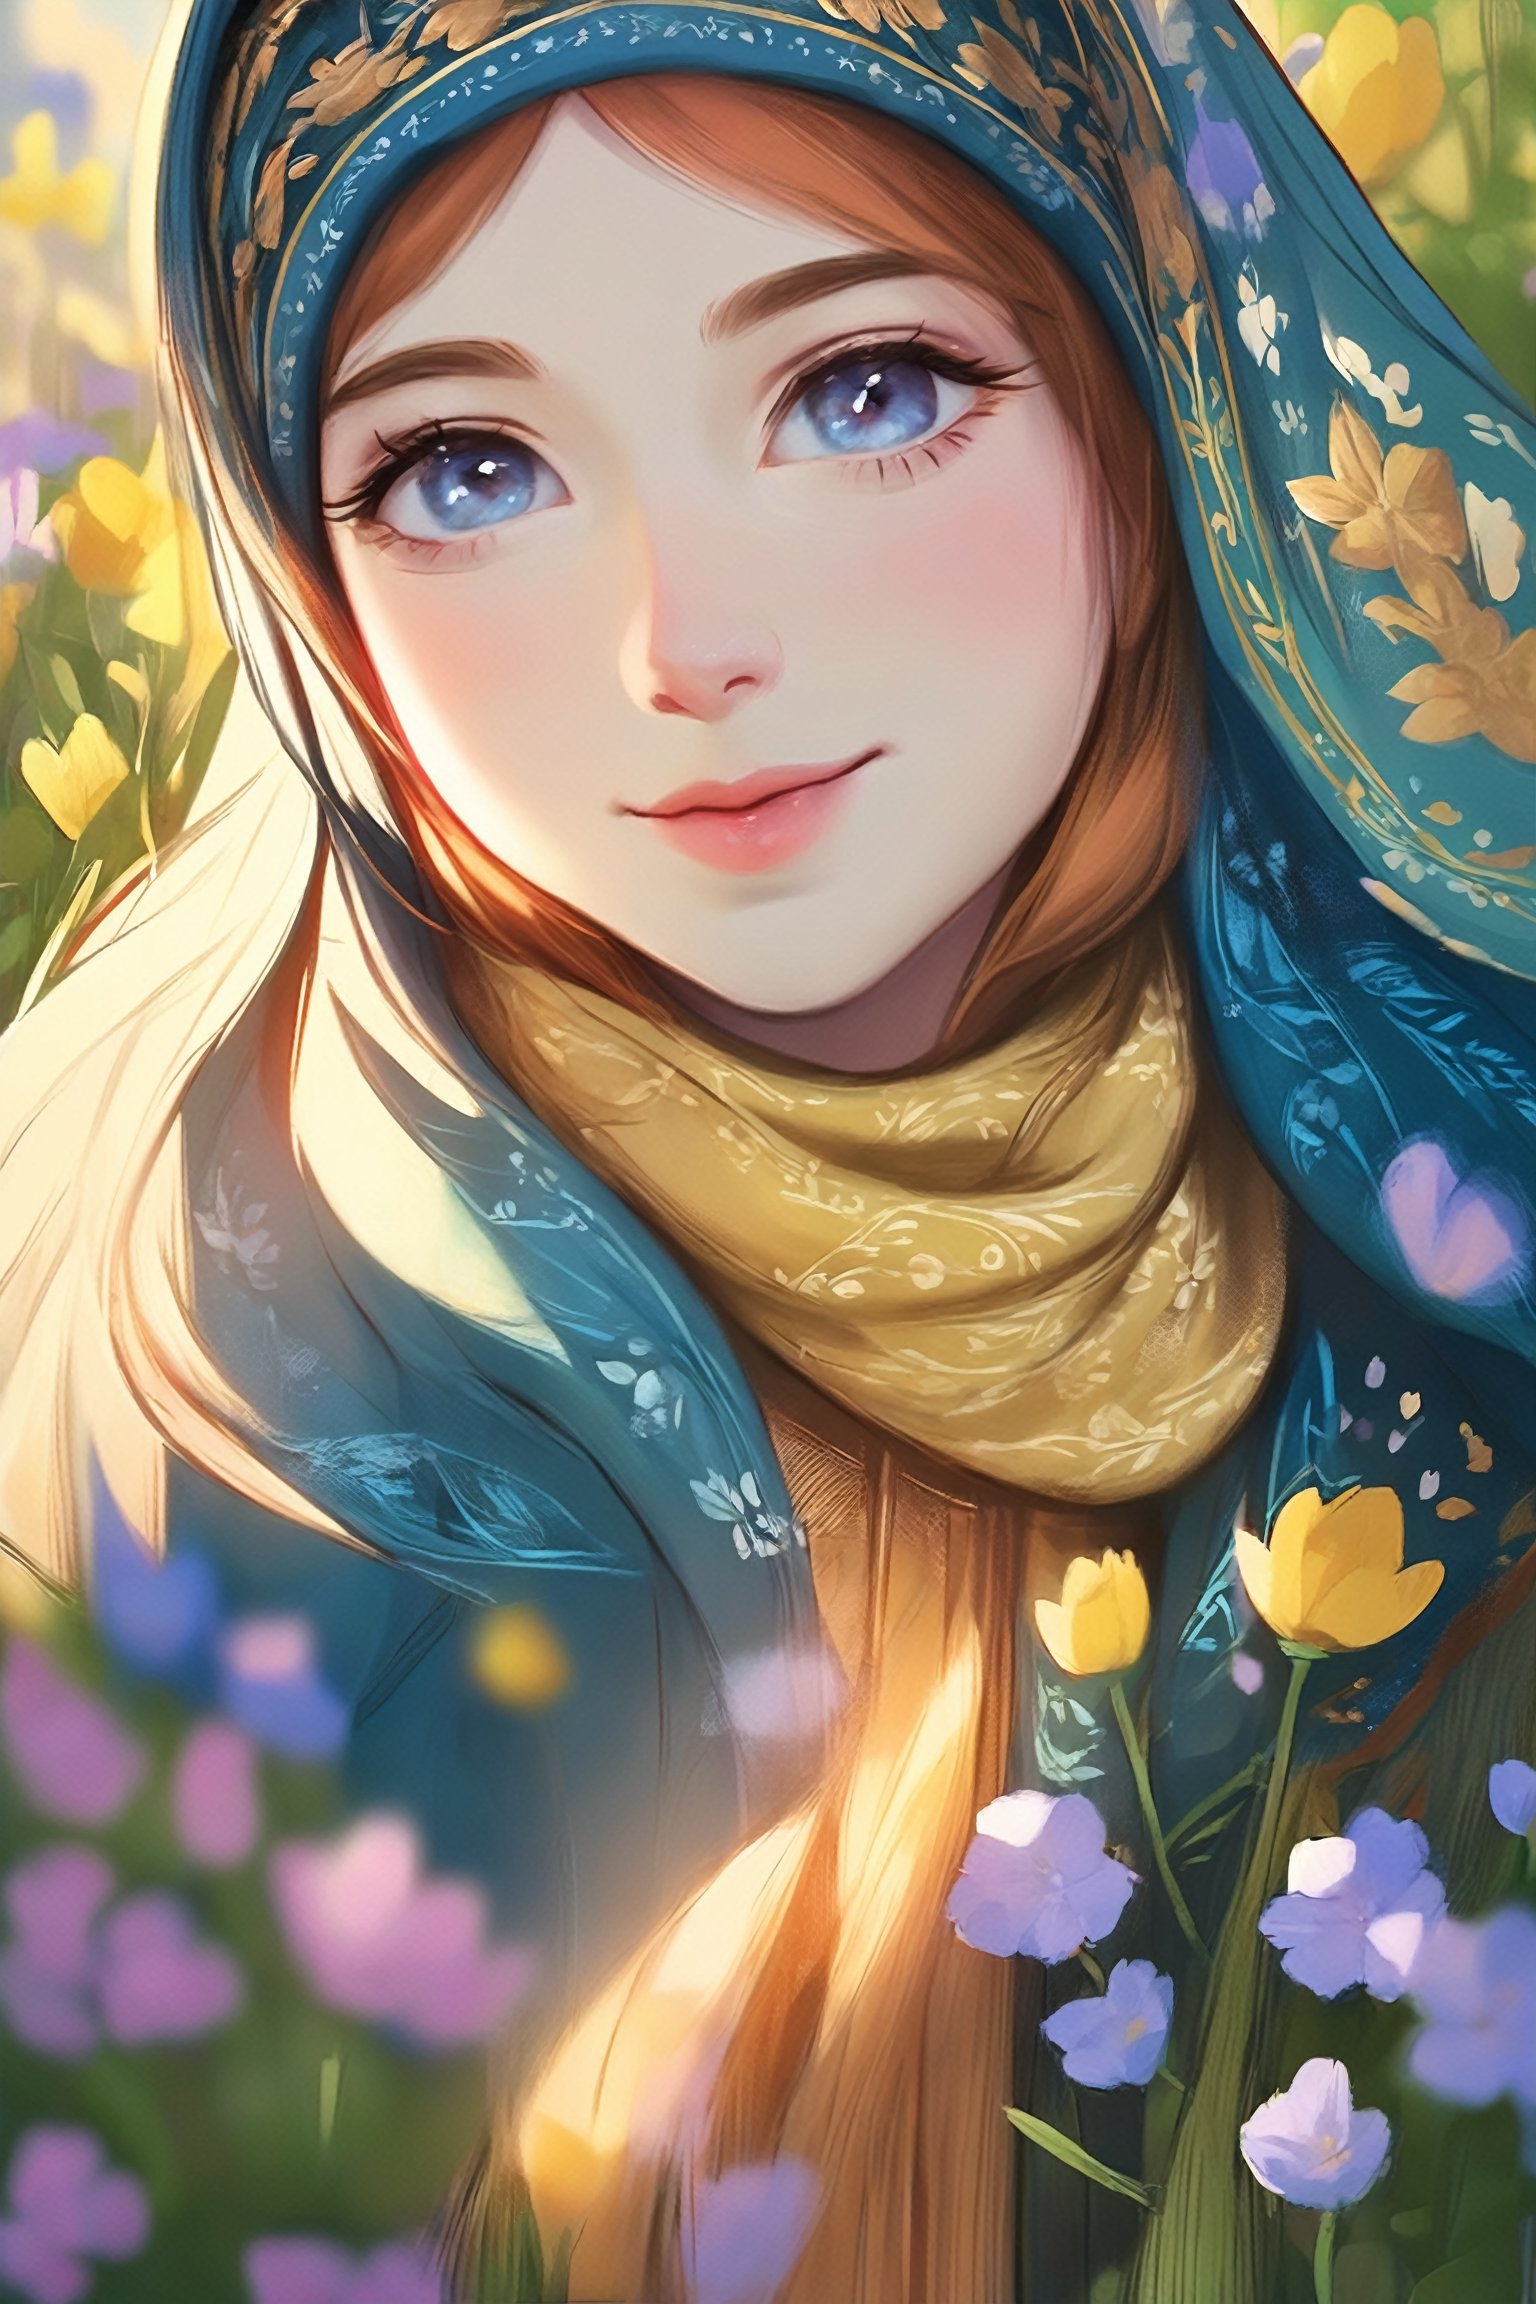 (1girl), a girl in an Orthodox church wears a modest scarf on her head, a long floor-length skirt with a pattern, beautiful girl smiles, beautiful eyes, high detail, clear face, light falls on her face, wildflowers, sunny day, voluminous lighting, soft morning light, sunlight glinting on her skin, Russian beauty (in color, color illustration), (full body, low-key, sharp focus on subject, intricate environment scenery:1.1), (masterpiece, detailed, highres:1.4), (perfect feminine anatomy, perfect proportions, Perfect Hands:1.125), Sweeping cinematic lens flares, ultra crisp details, (f_stop 2.8), (focal_length 85mm f/2.8), K-Eyes, Perfect Hands, Wonder of Beauty, K-Eyes,<lora:EMS-248183-EMS:0.700000>,<lora:EMS-304982-EMS:0.800000>,<lora:EMS-299631-EMS:0.800000>